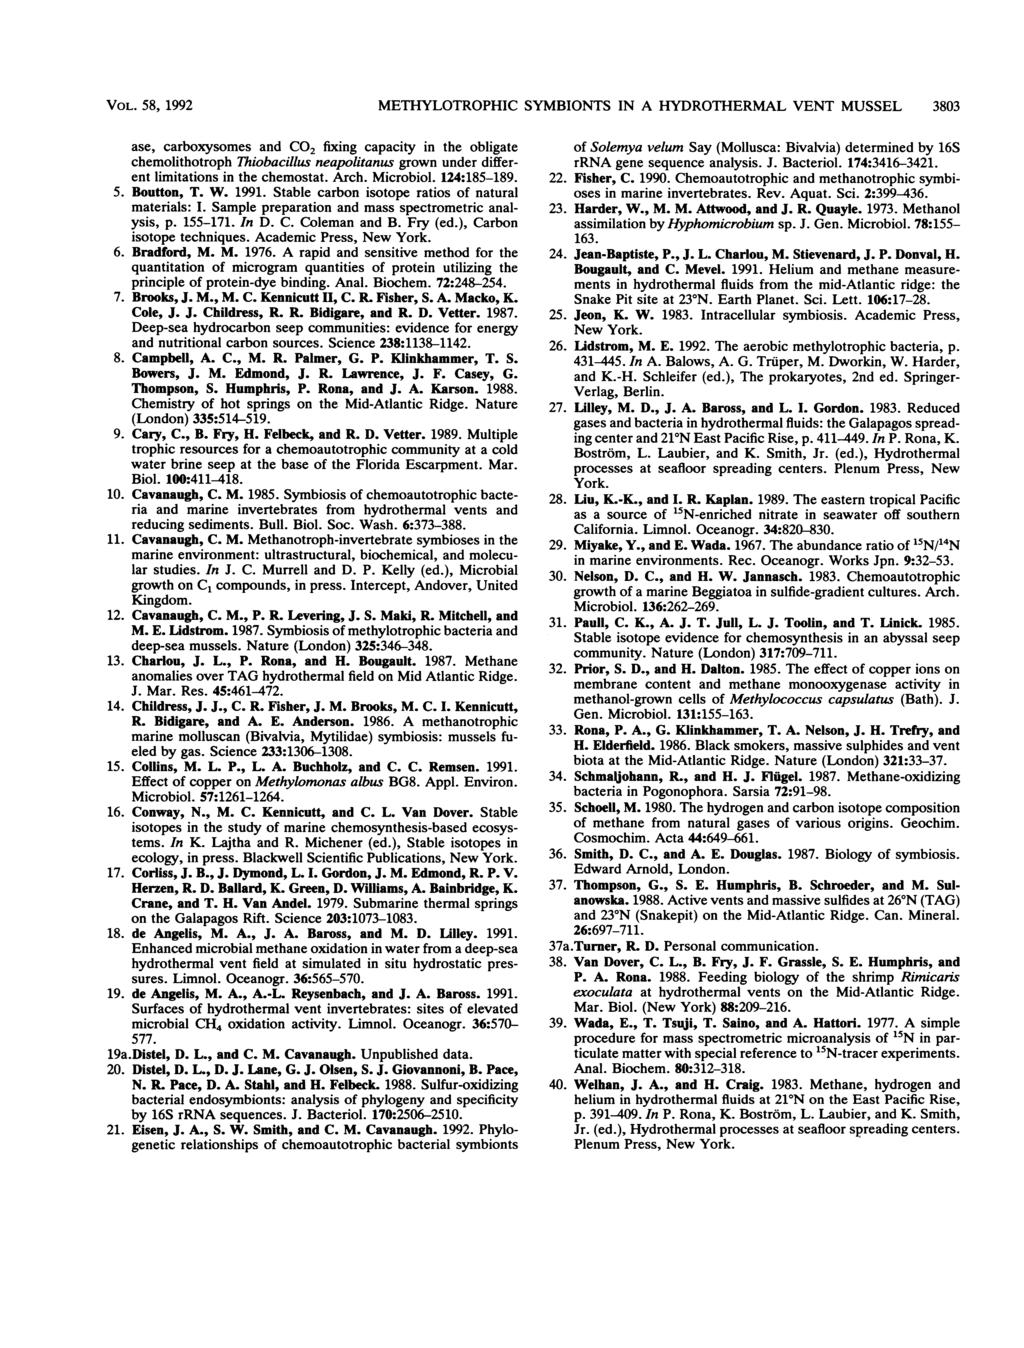 VOL. 58, 1992 METHYLOTROPHIC SYMBIONTS IN A HYDROTHERMAL VENT MUSSEL 3803 ase, carboxysomes and CO2 fixing capacity in the obligate chemolithotroph Thiobacillus neapolitanus grown under different